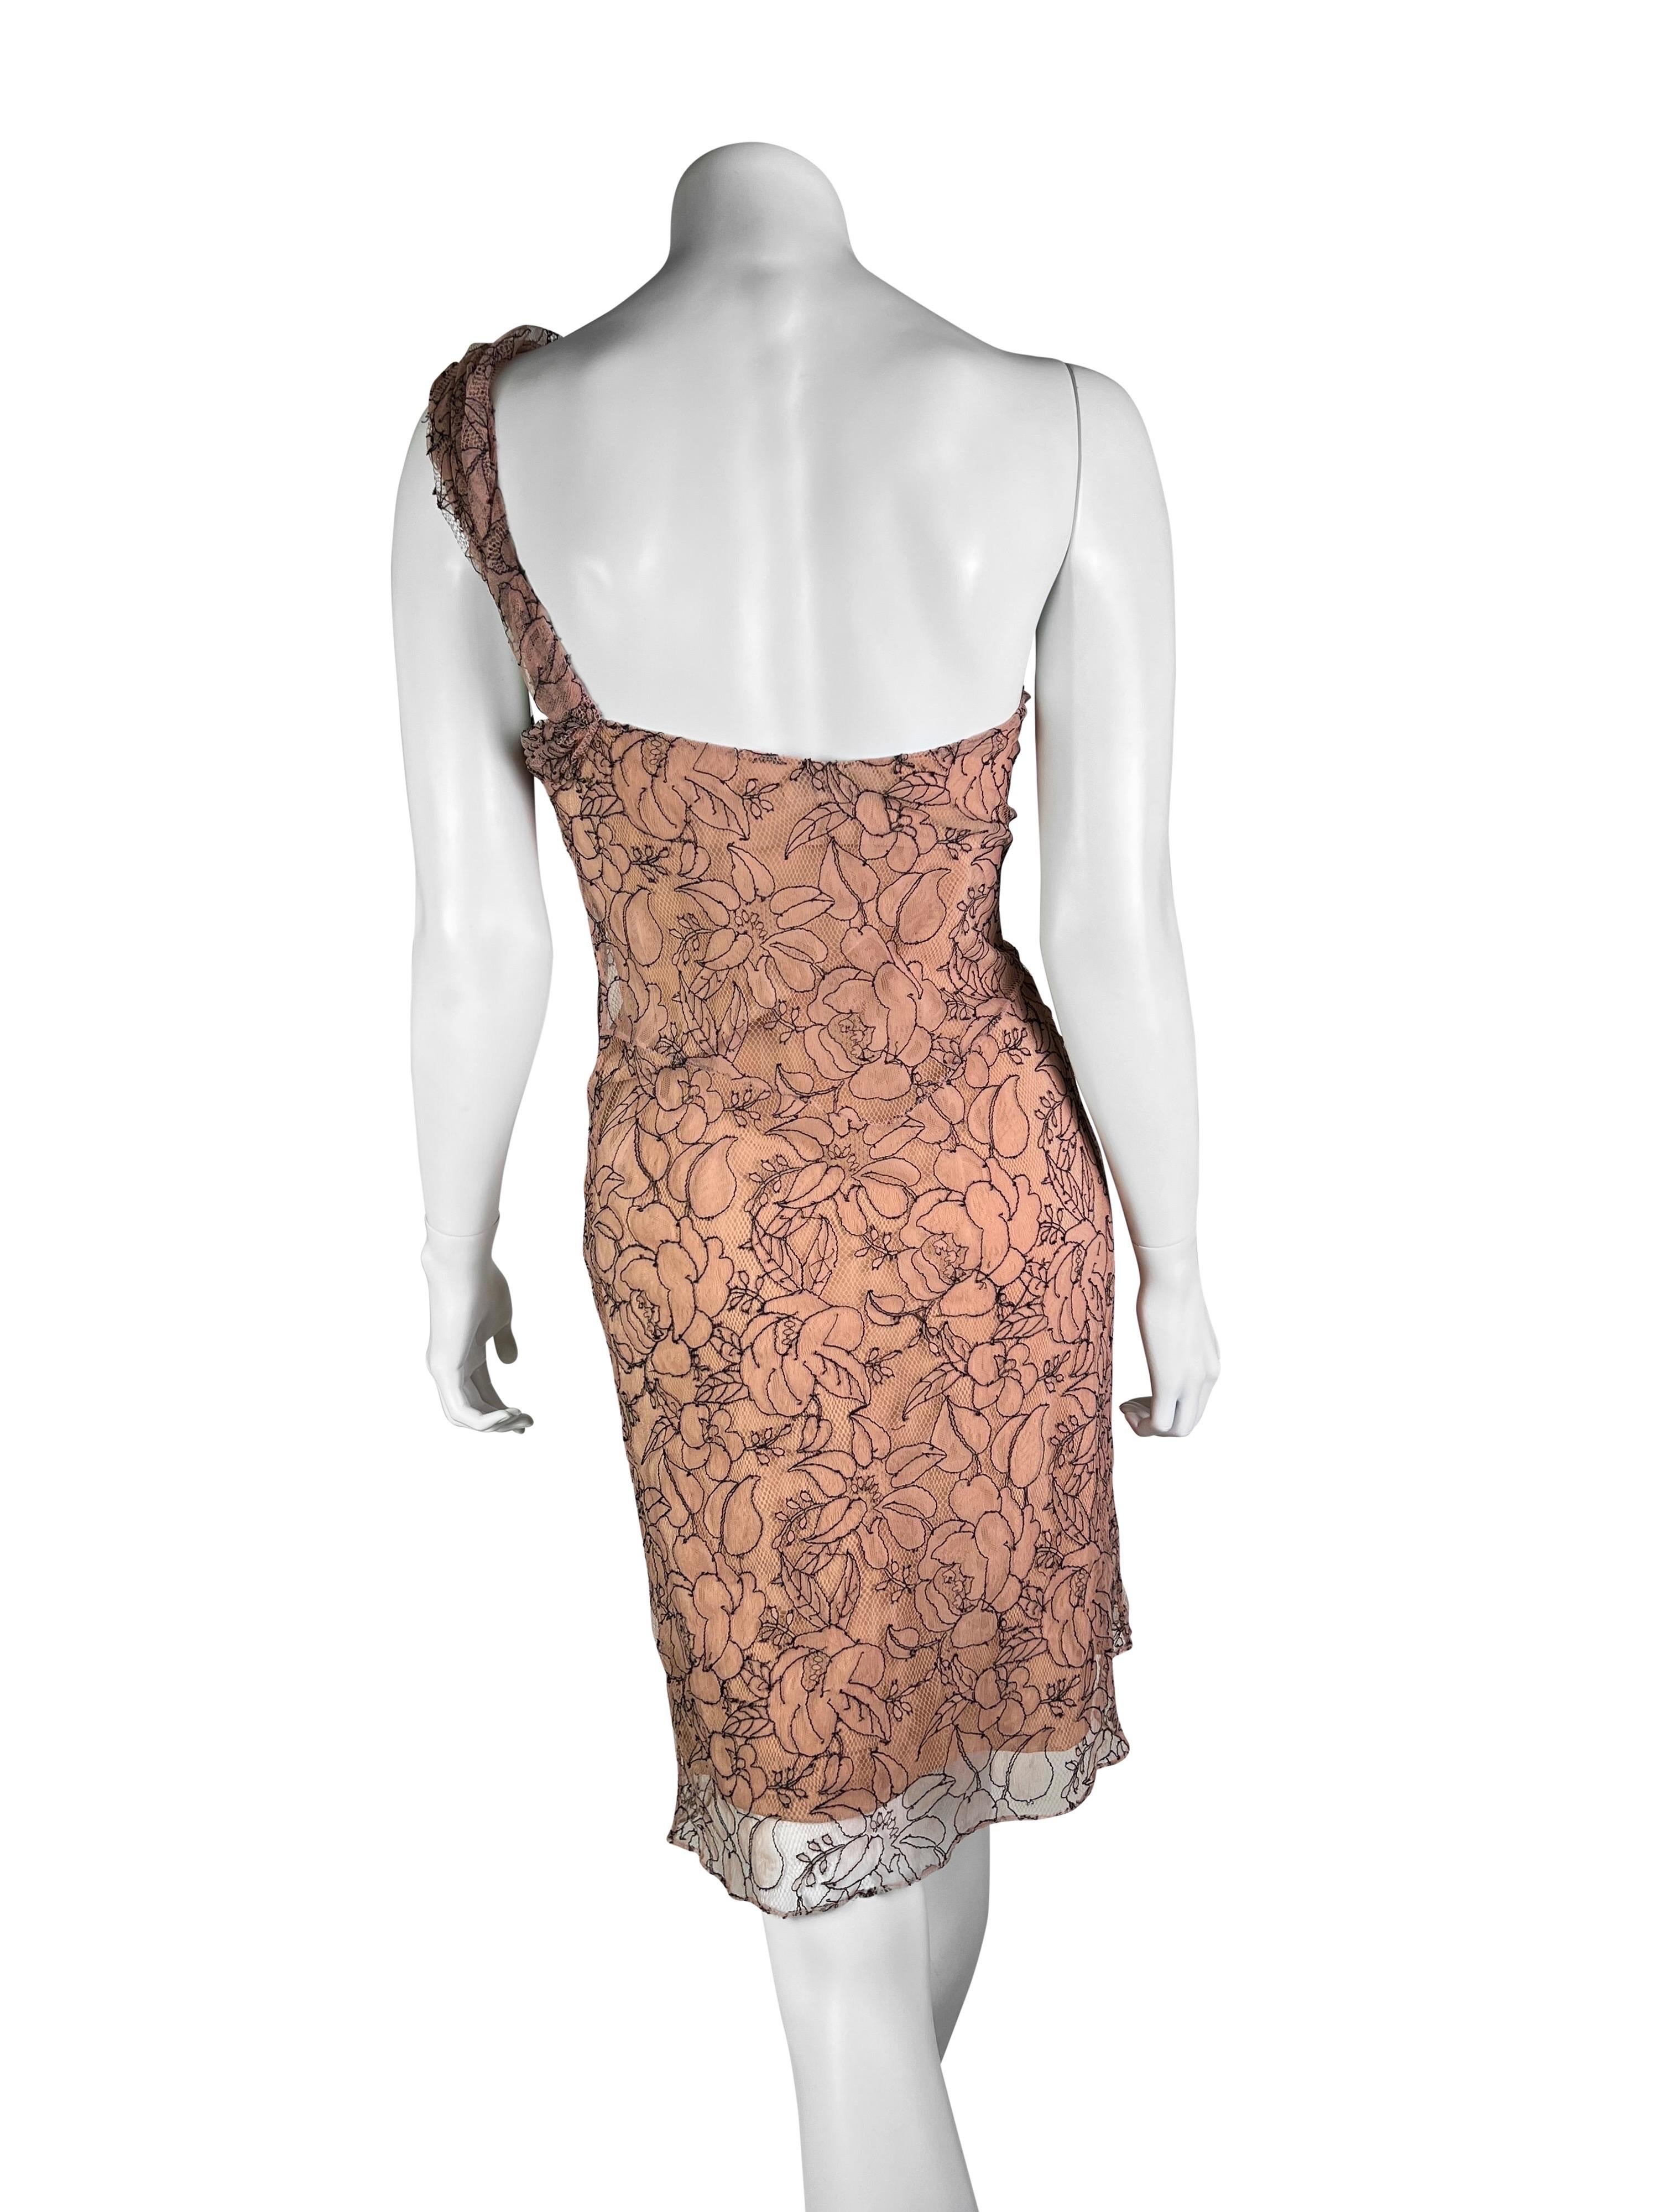  Spring 2006 Dior by John Galliano Lace Dress For Sale 2